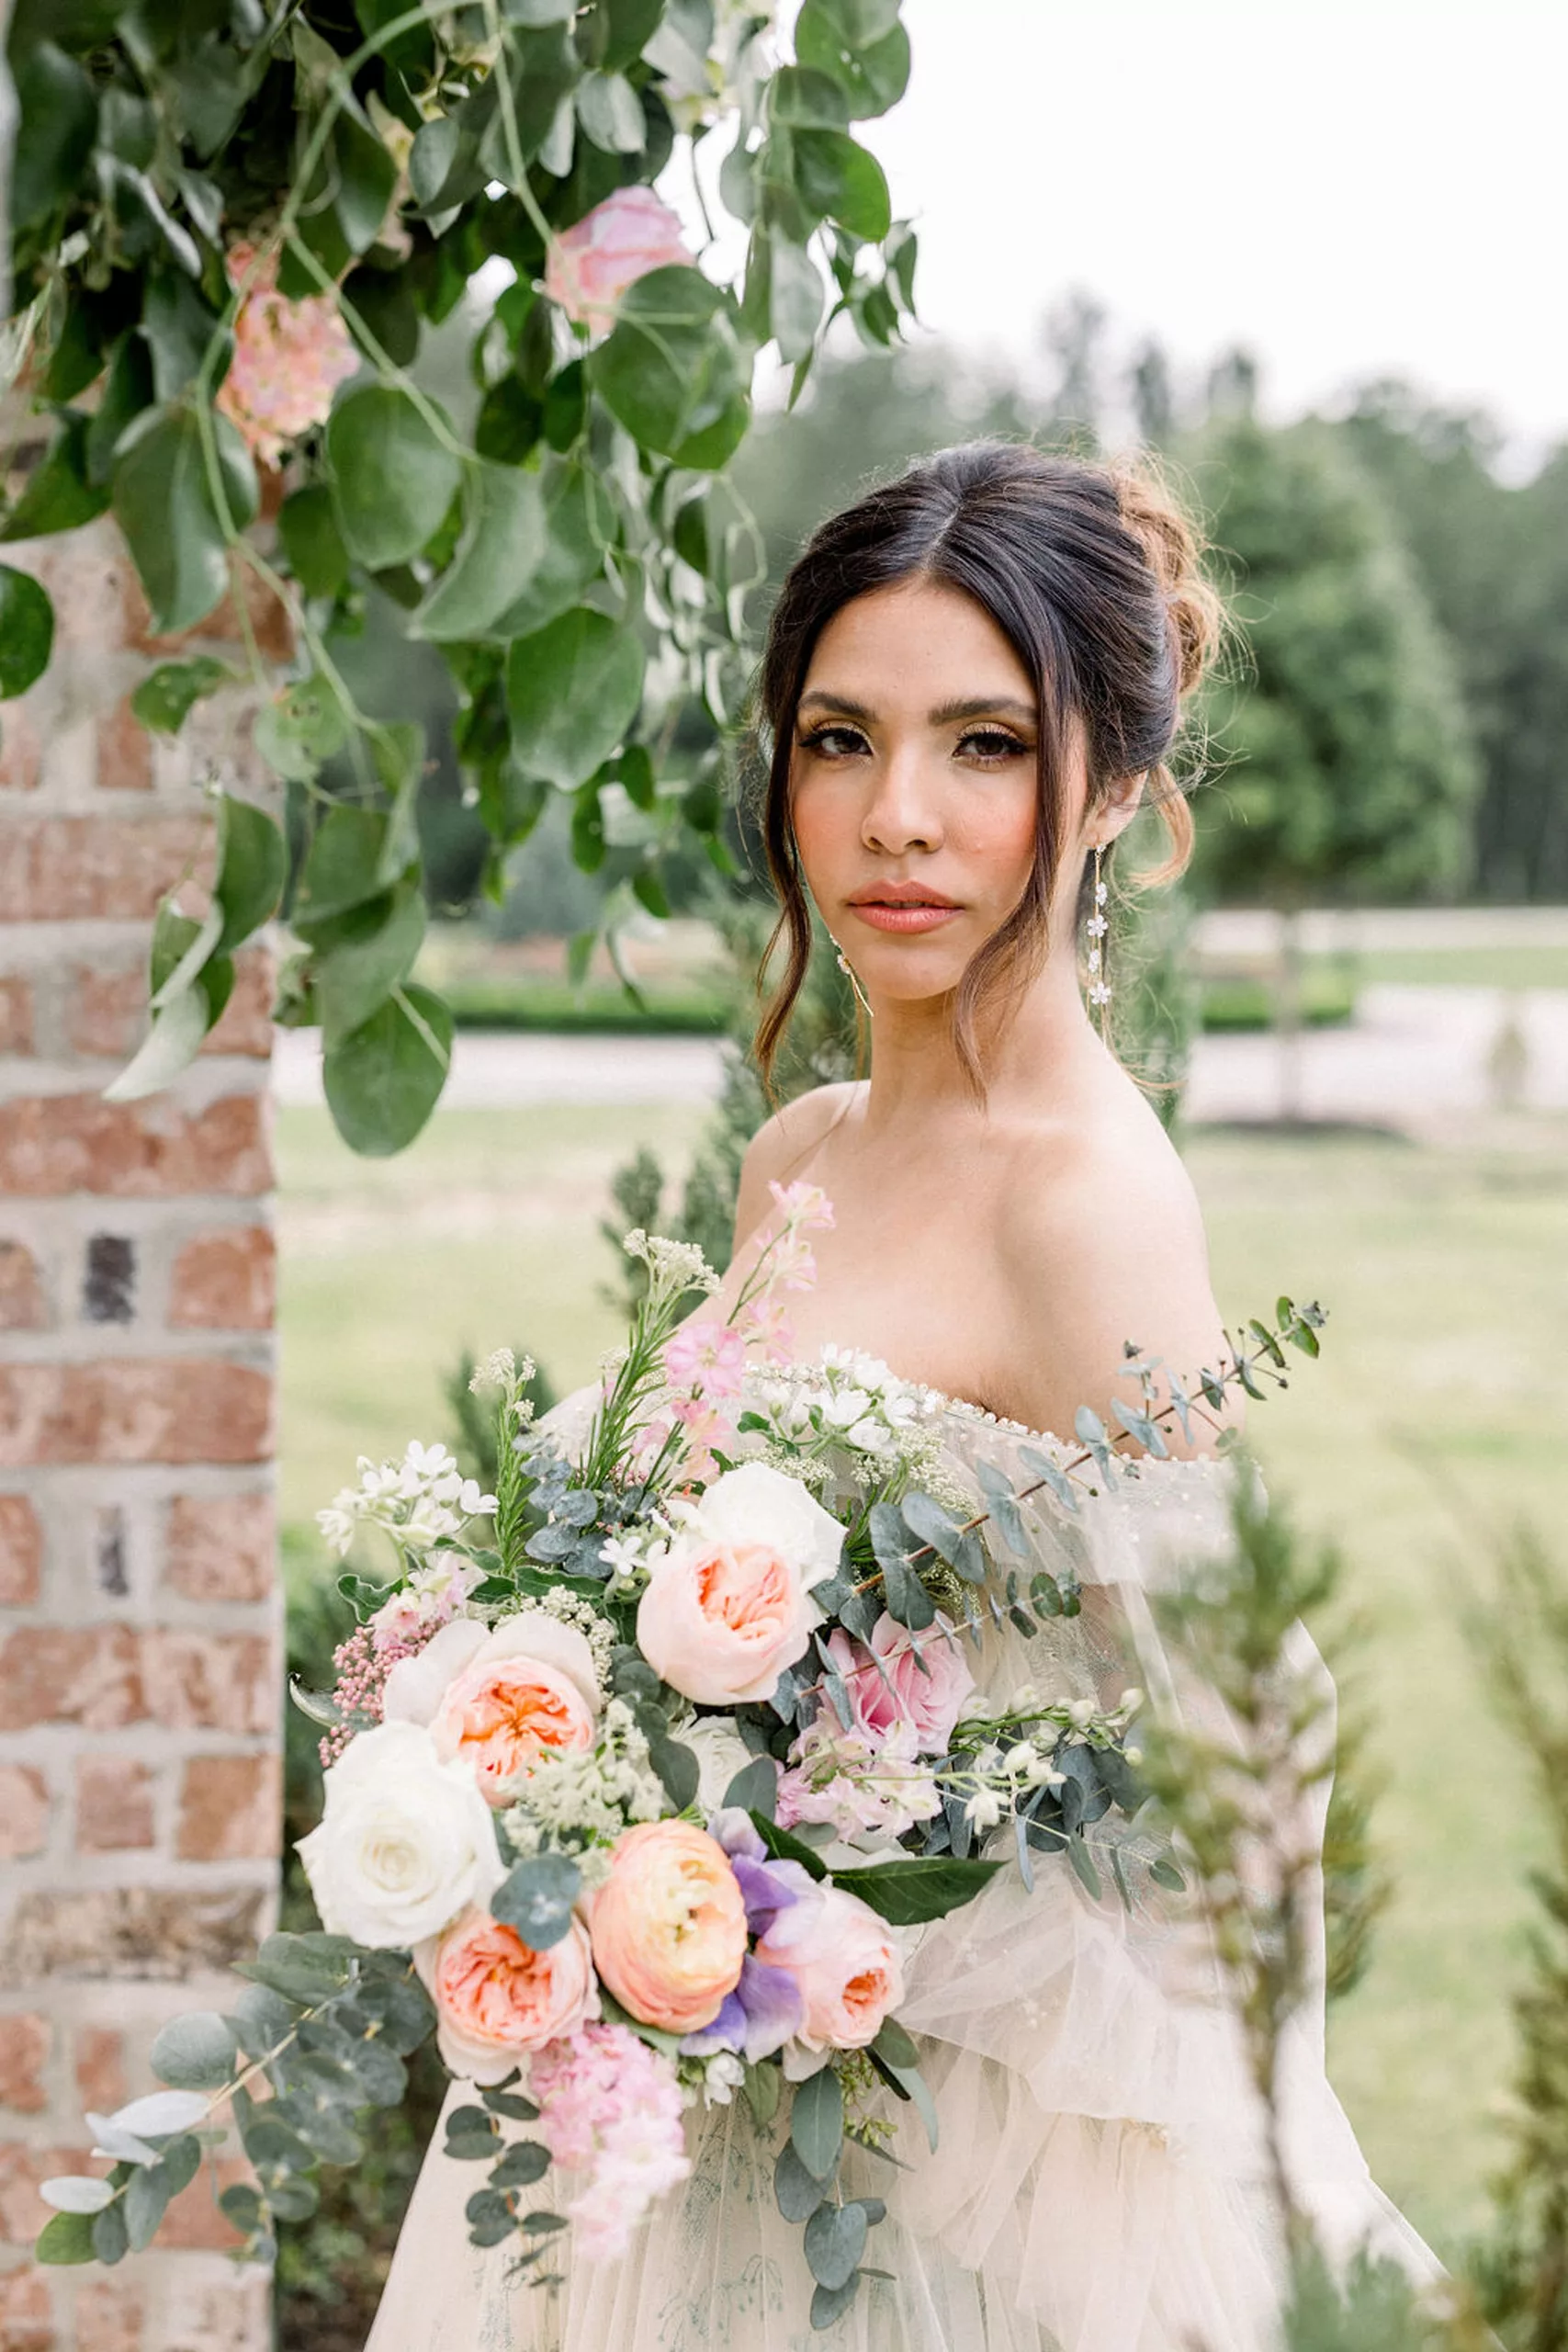 A bride stands in a garden holding a large pink and white rose bouquet and wearing a velour dress